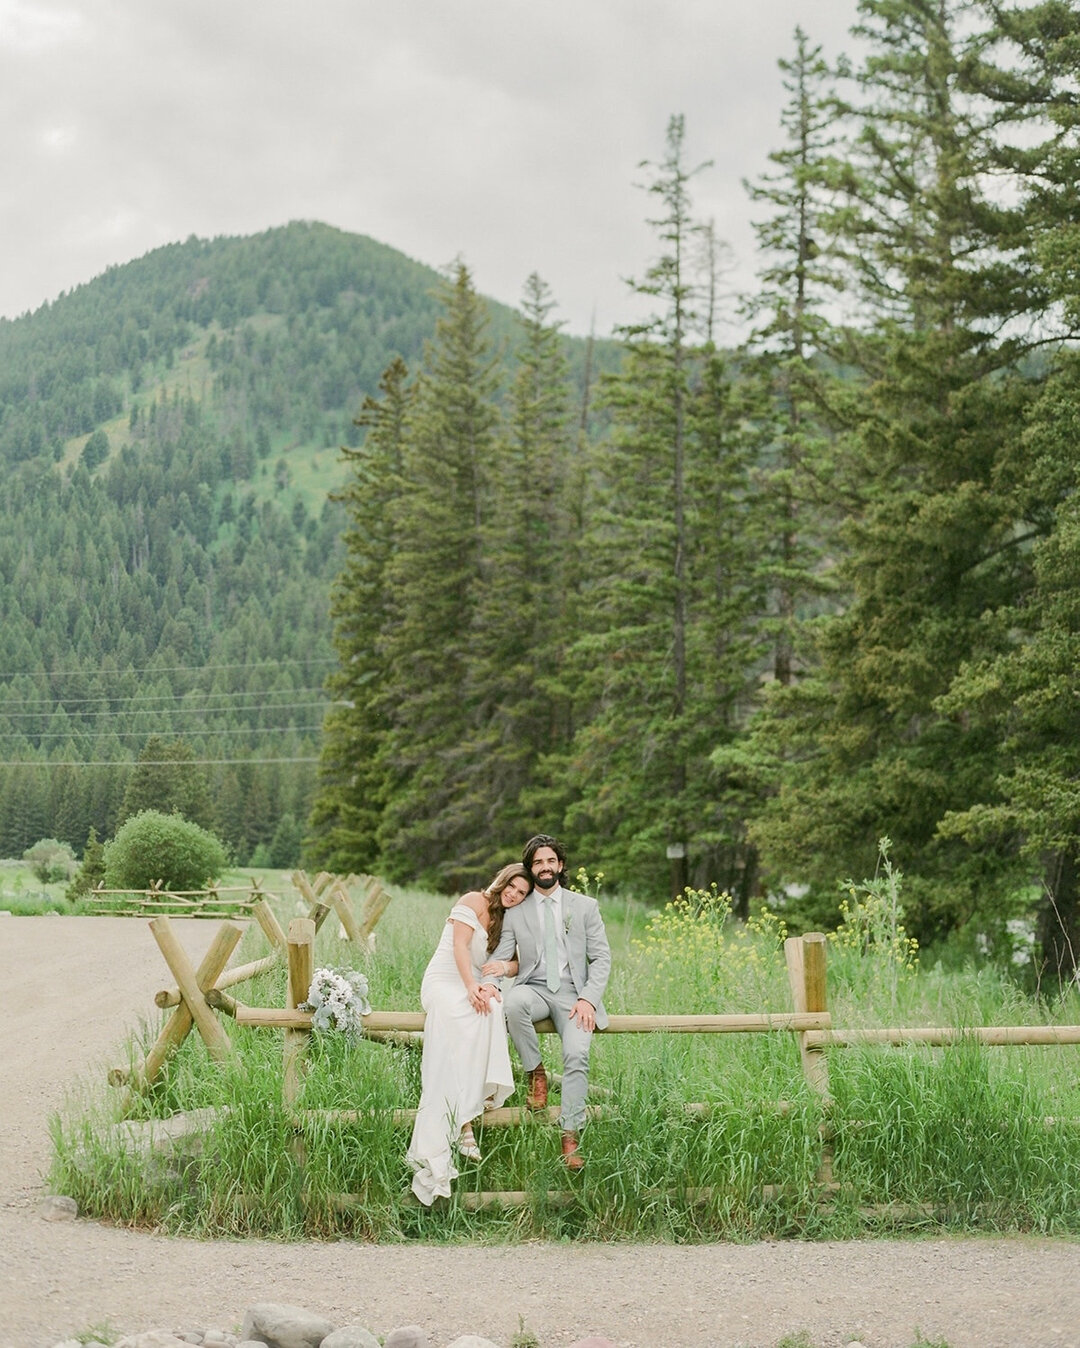 We traveled down the mountain road between their ceremony and reception from Big Sky to Bozeman stopping all along the way for breathtaking views like this with the newlywed pair. James and Gabbi&rsquo;s wedding day turned family vacation was like a 